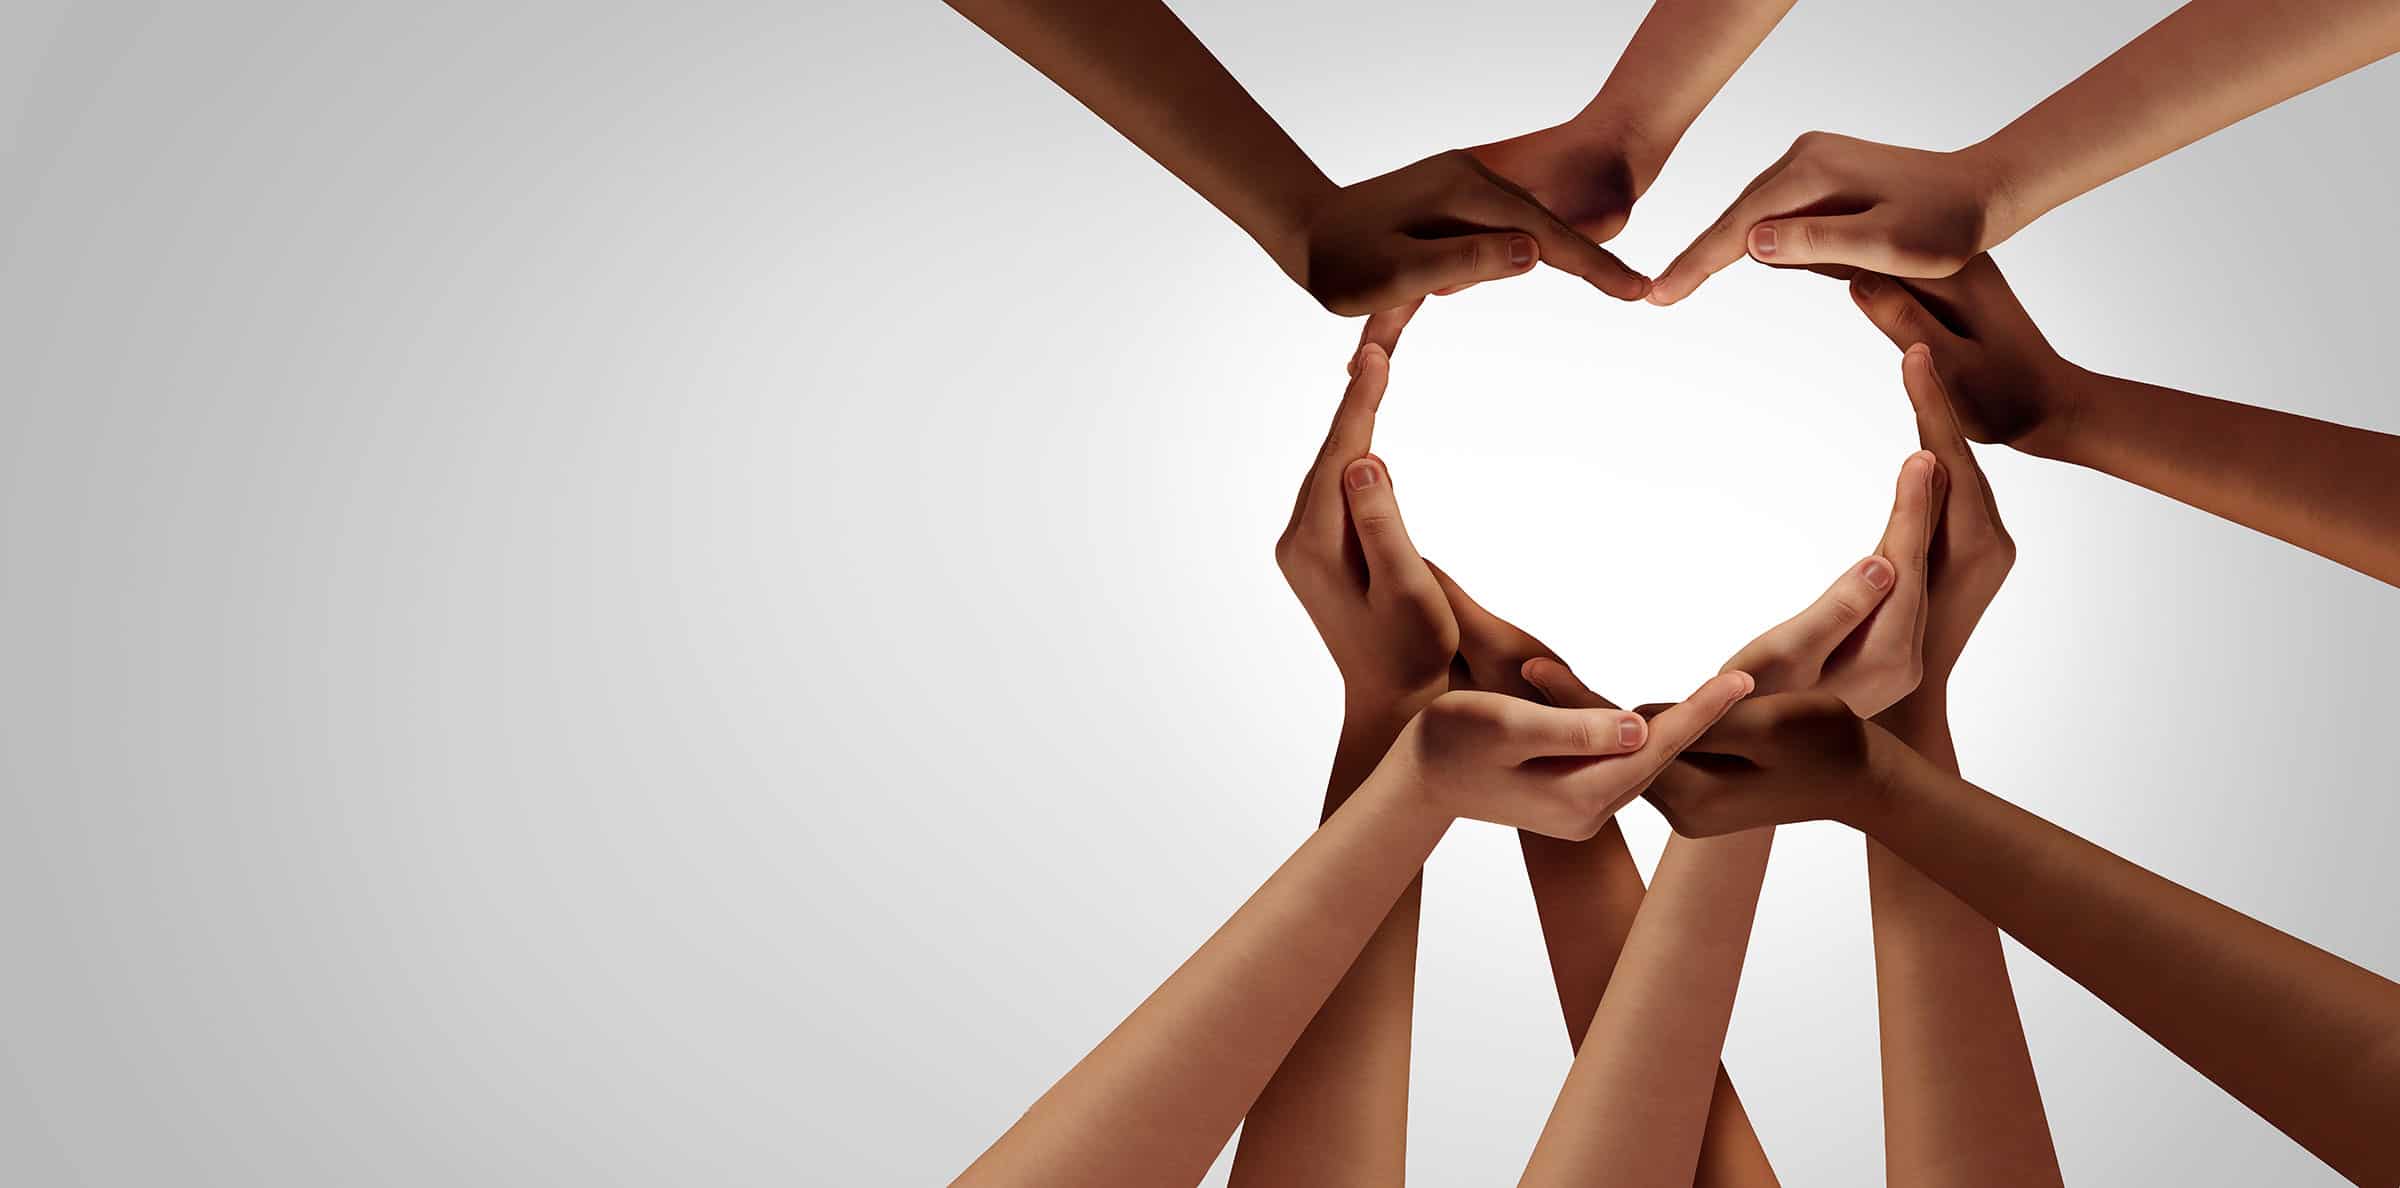 Several hands forming the shape of a heart